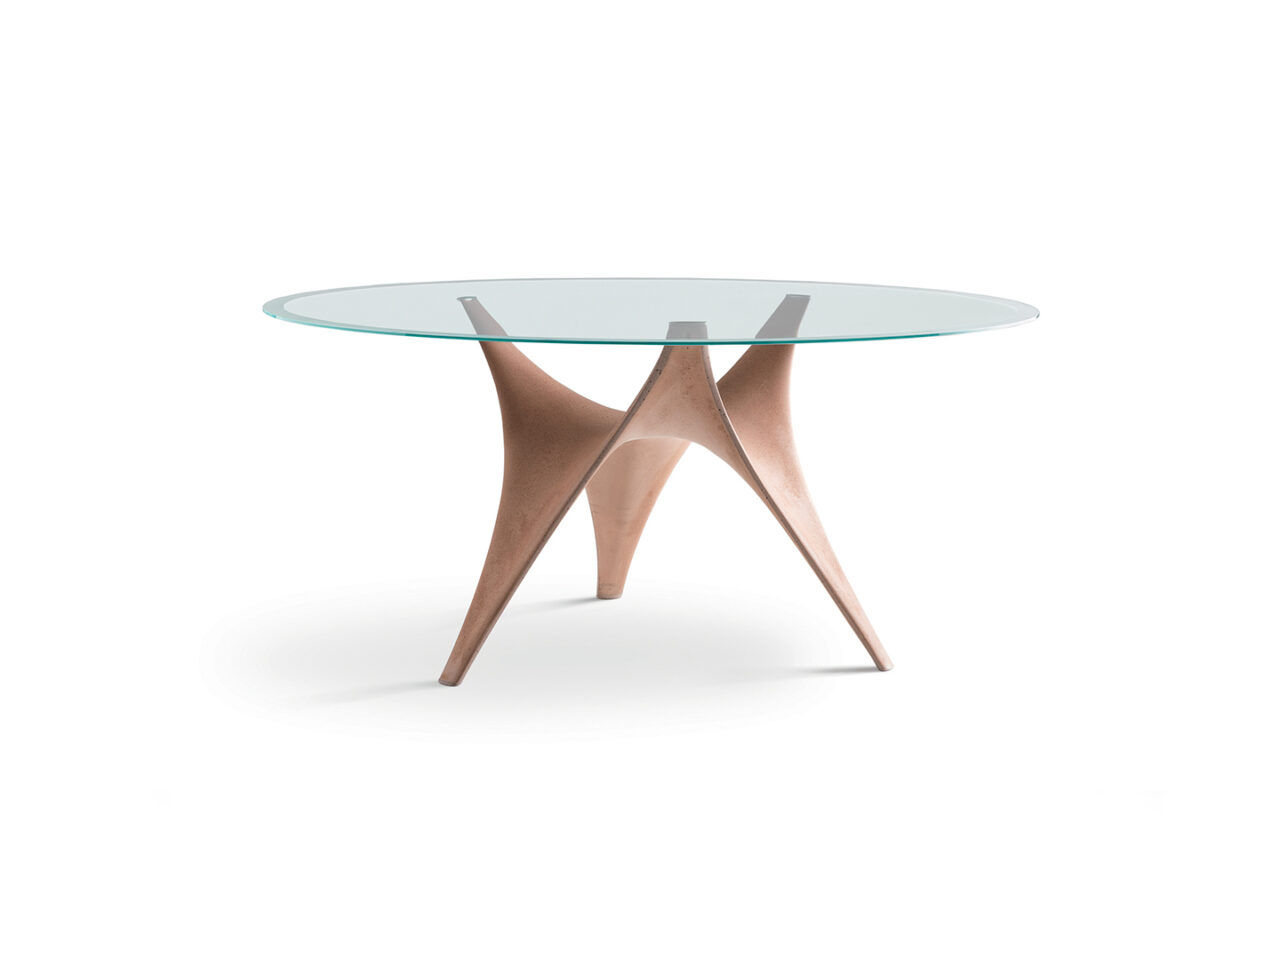 Arc is a dining table designed by Norman Foster and offered by Peverelli